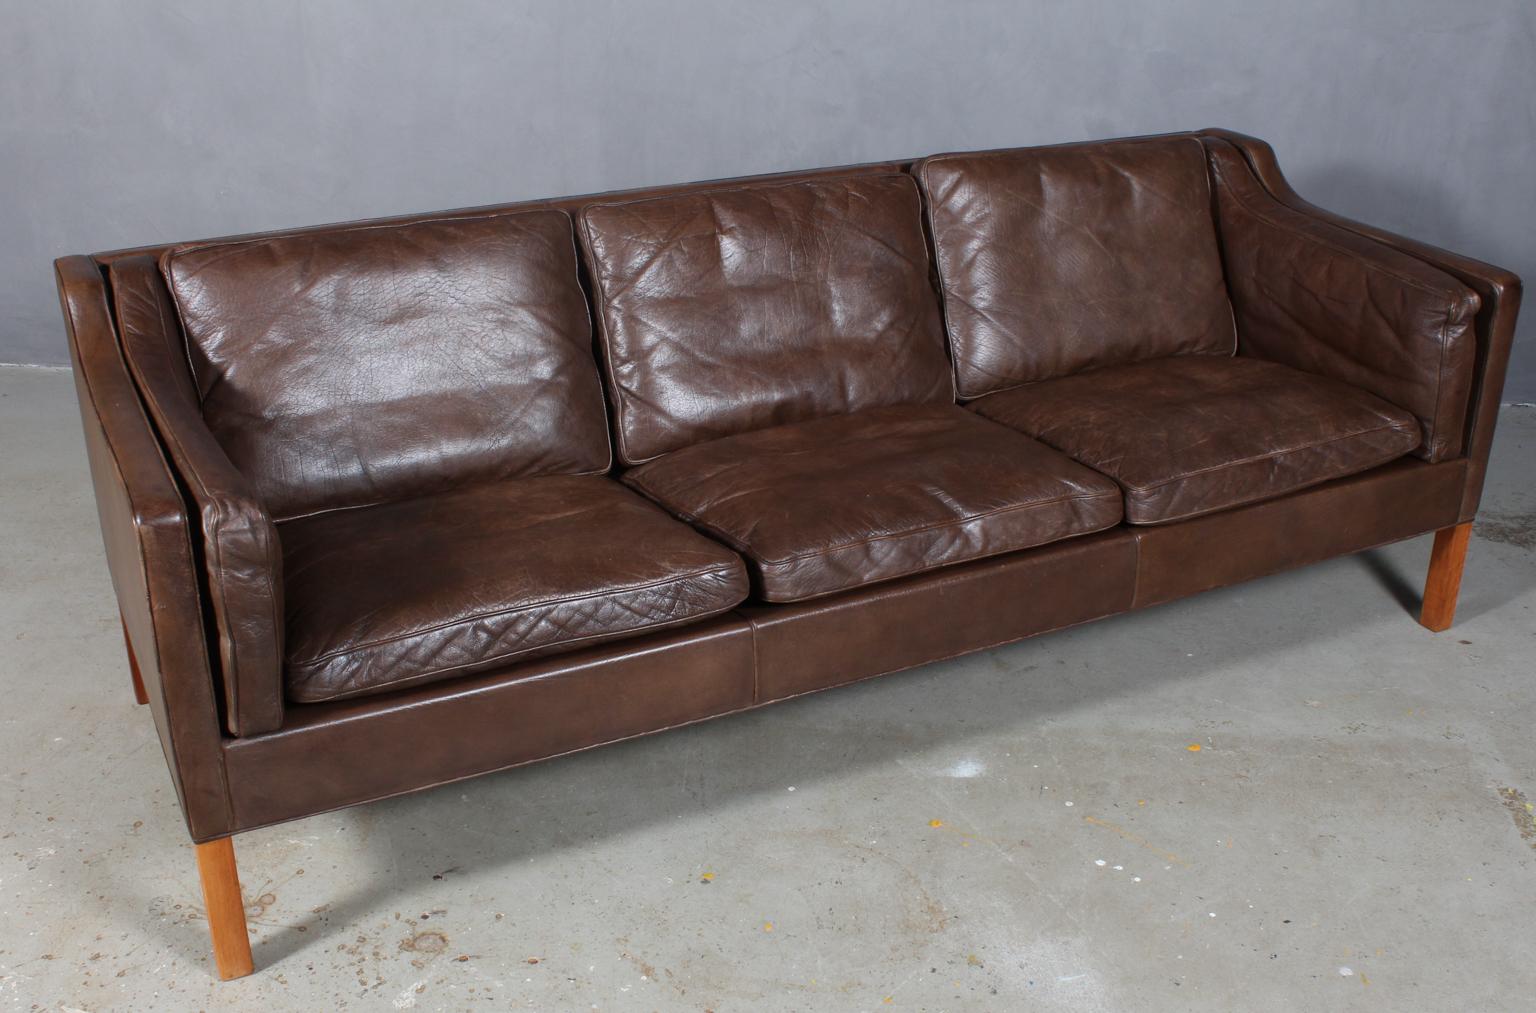 Børge Mogensen three-seat sofa original upholstered with brown leather.

Legs of teak.

Model 2213, made by Fredericia Furniture.